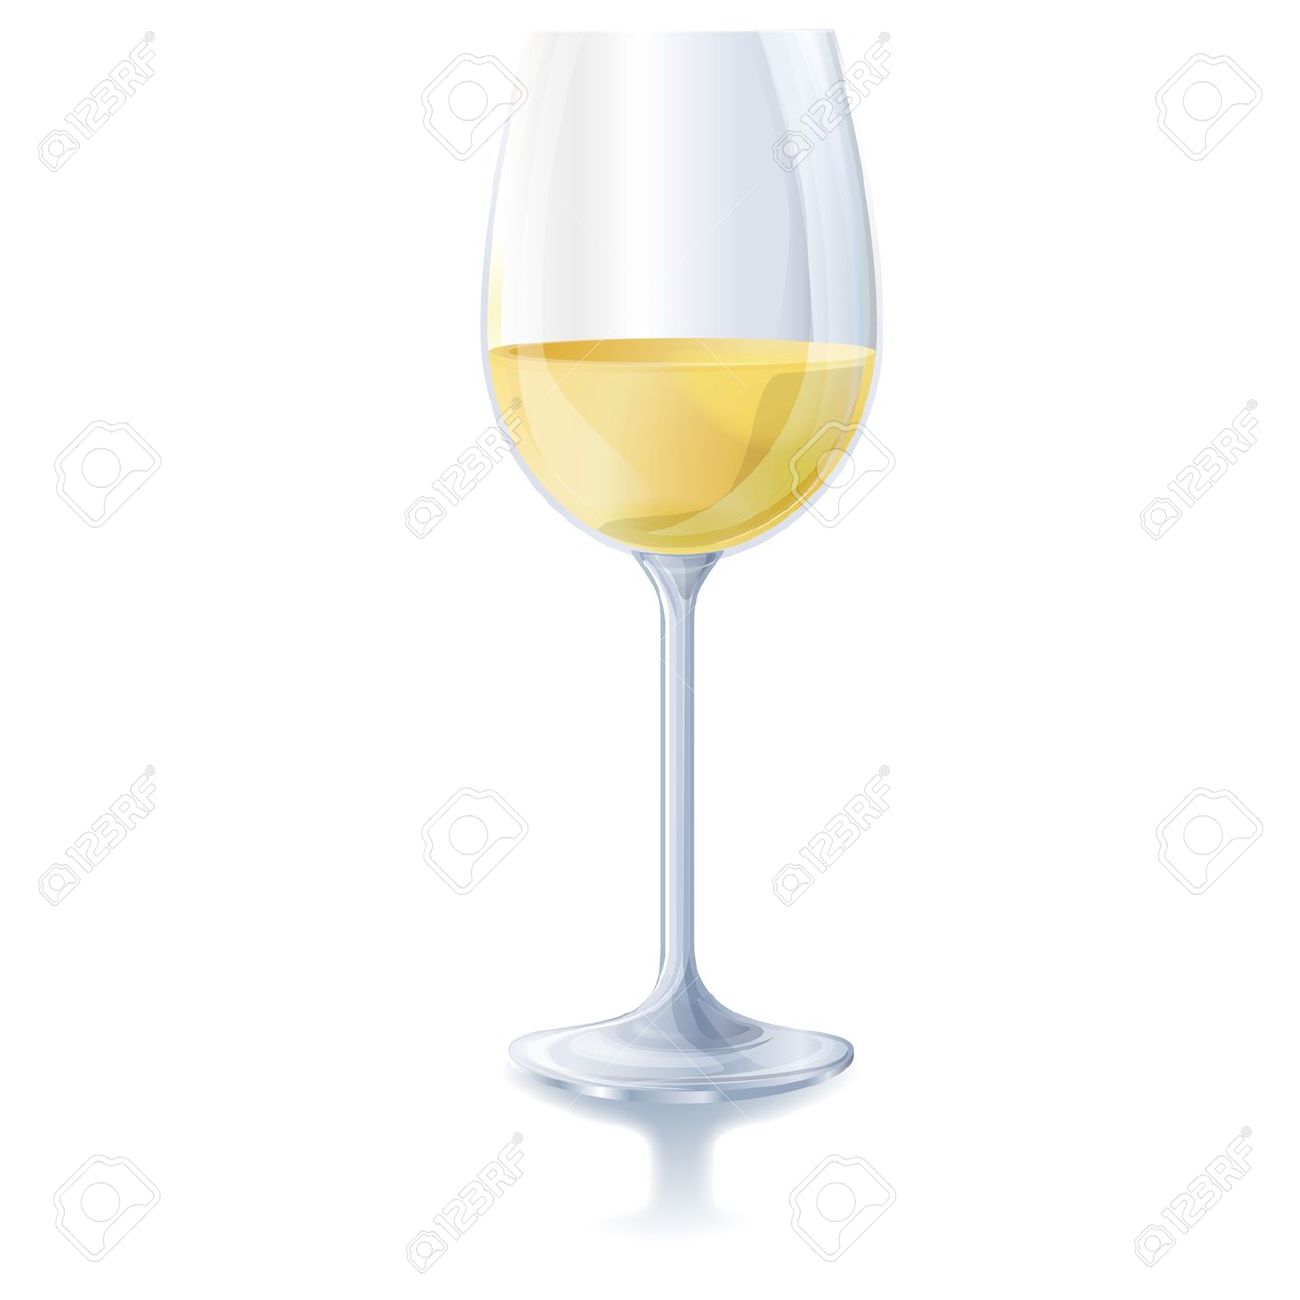 clipart glass of wine - photo #21